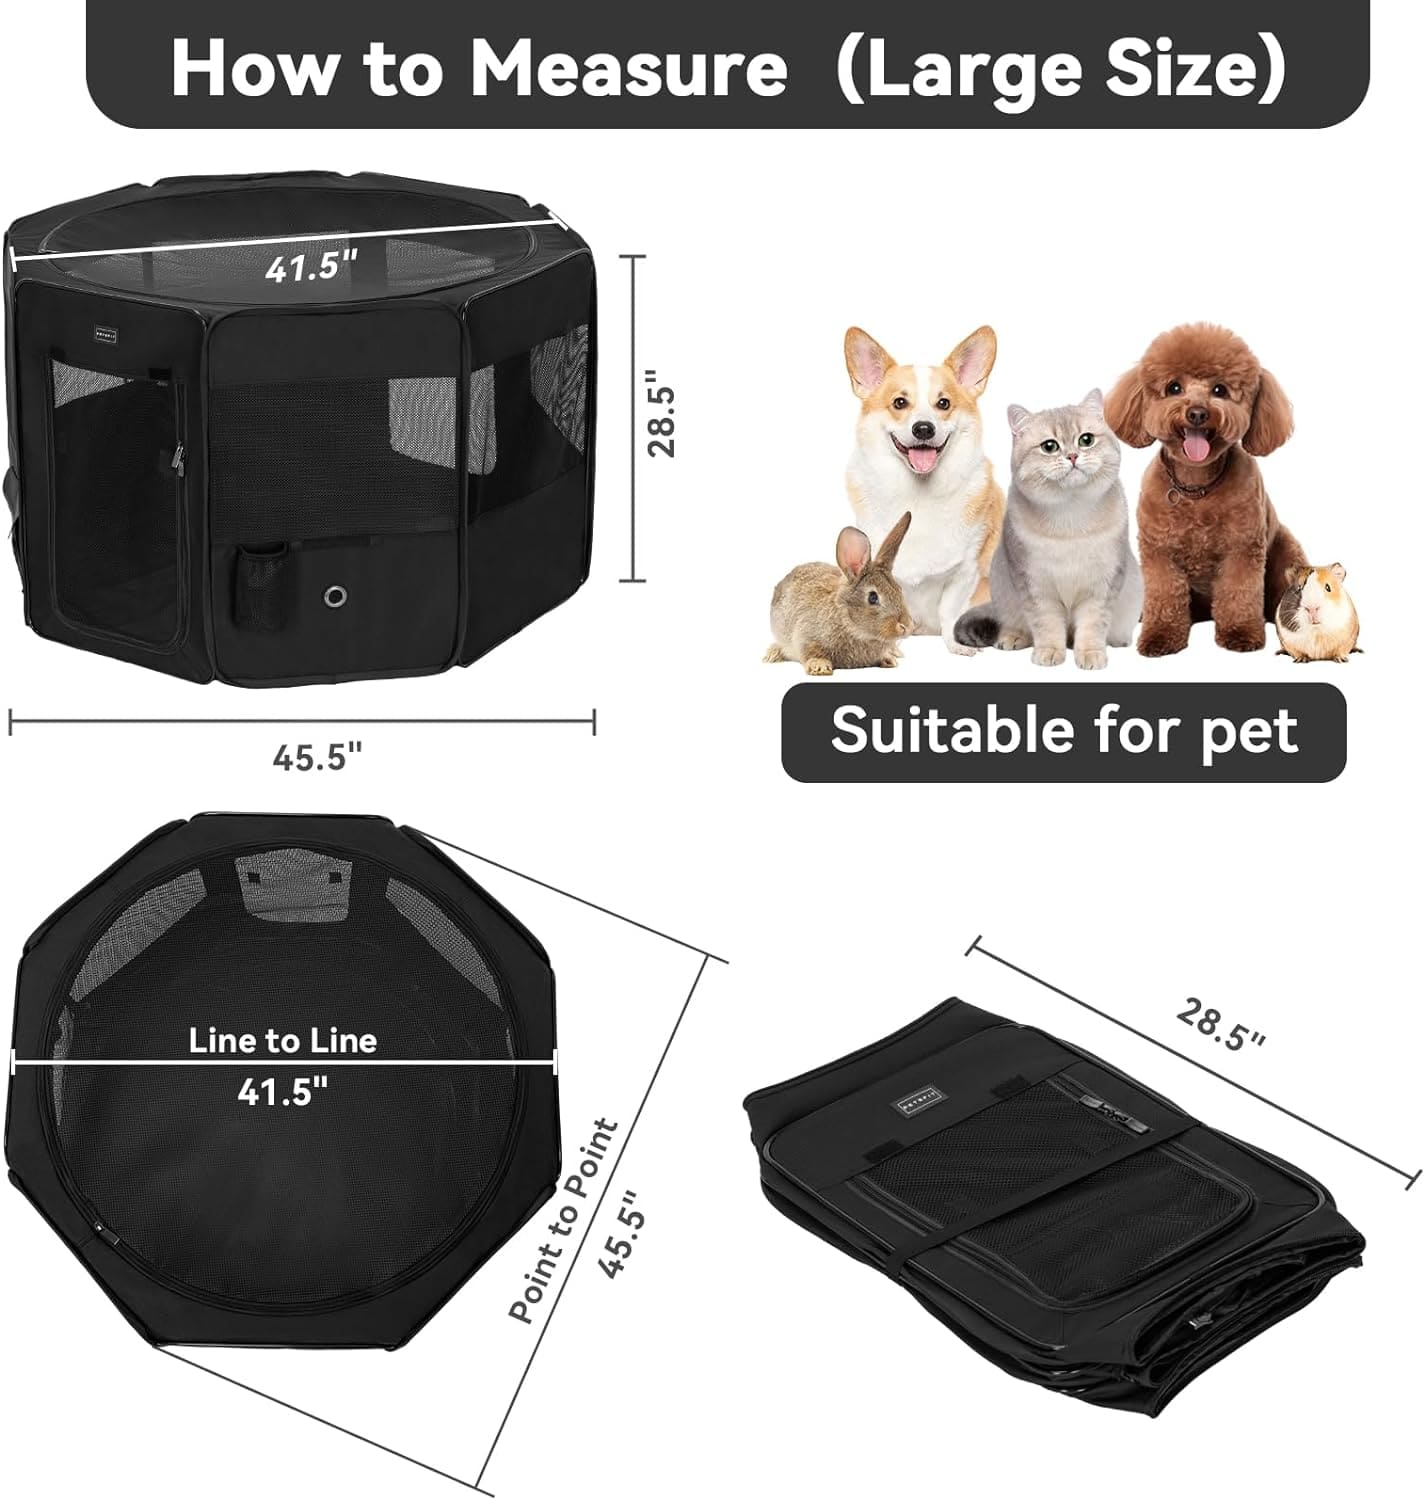 Petsfit Dog Playpen 45.5" Portable Pet Play Pens for Small Medium Dogs, Cat Playpen Indoor/Outdoor with Carring Case, Removable Zipper Top and Bottom